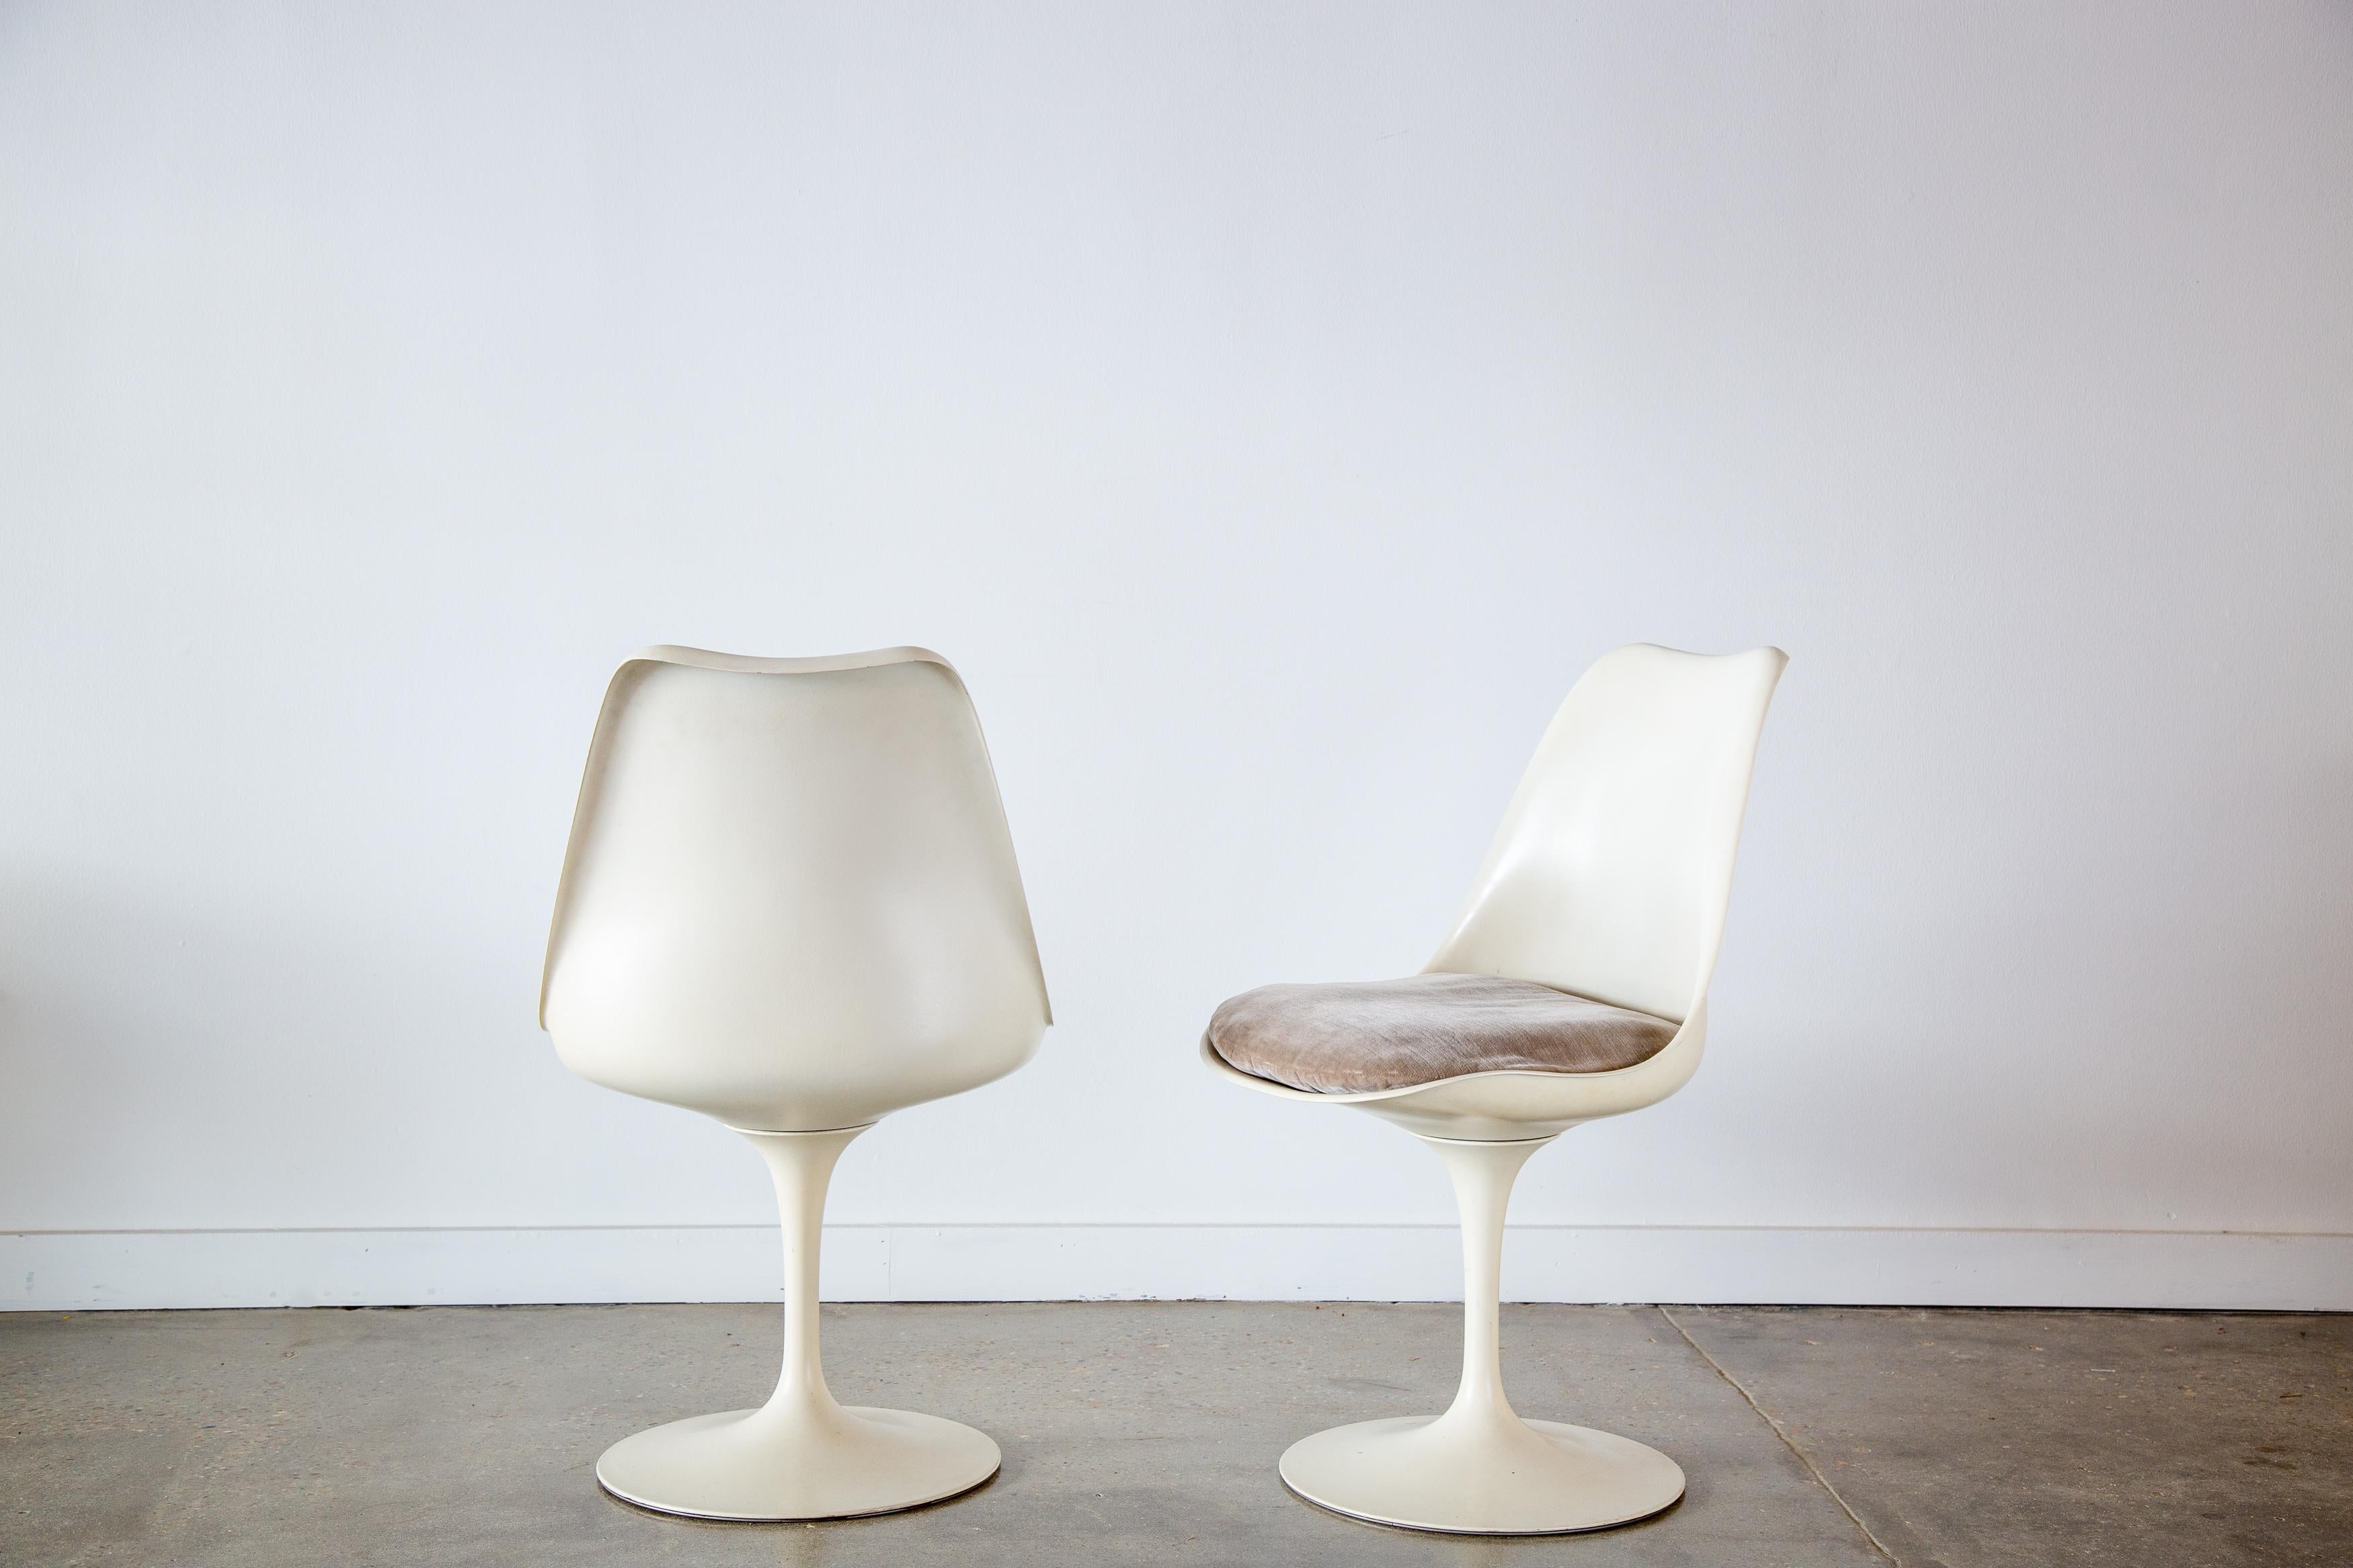 1950s Early Tulip Swivel Chairs by Eero Saarinen for Knoll - a pair In Good Condition For Sale In Virginia Beach, VA